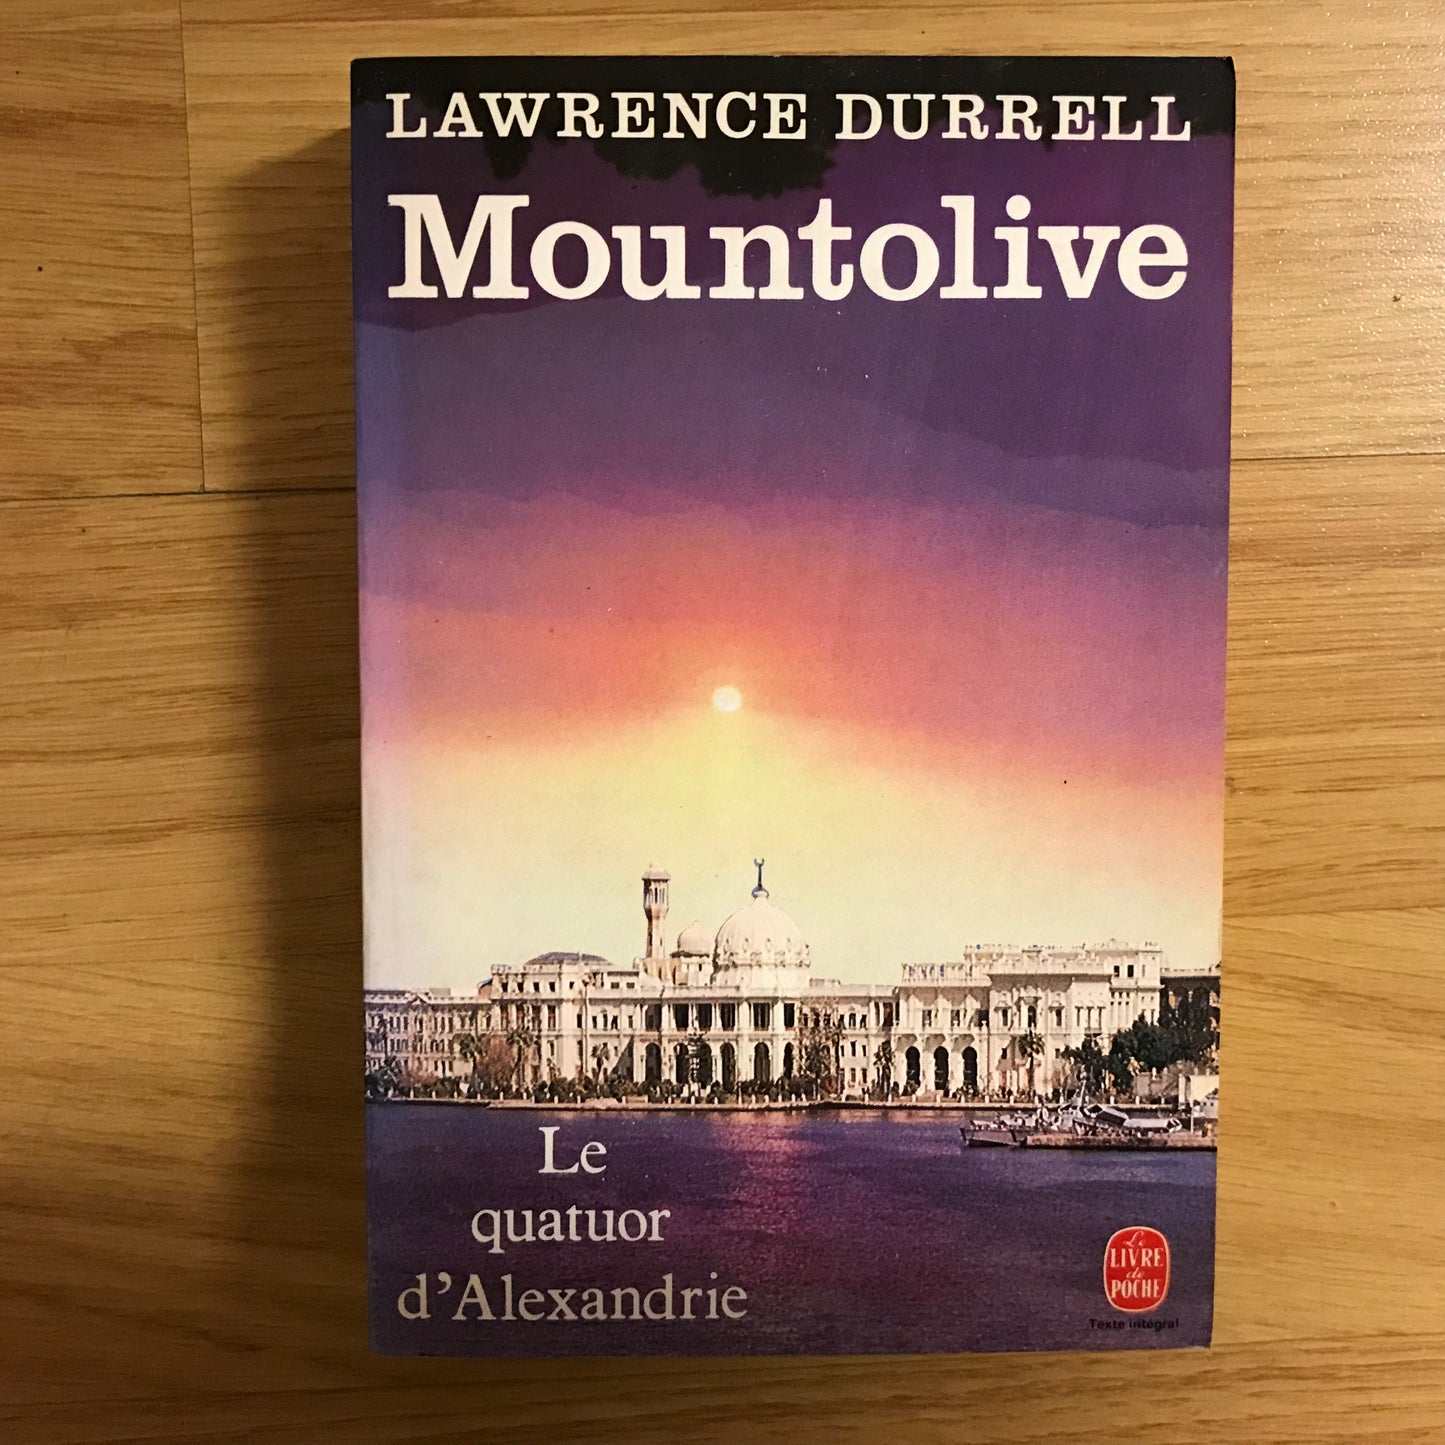 Durrell, Lawrence - Mountolive